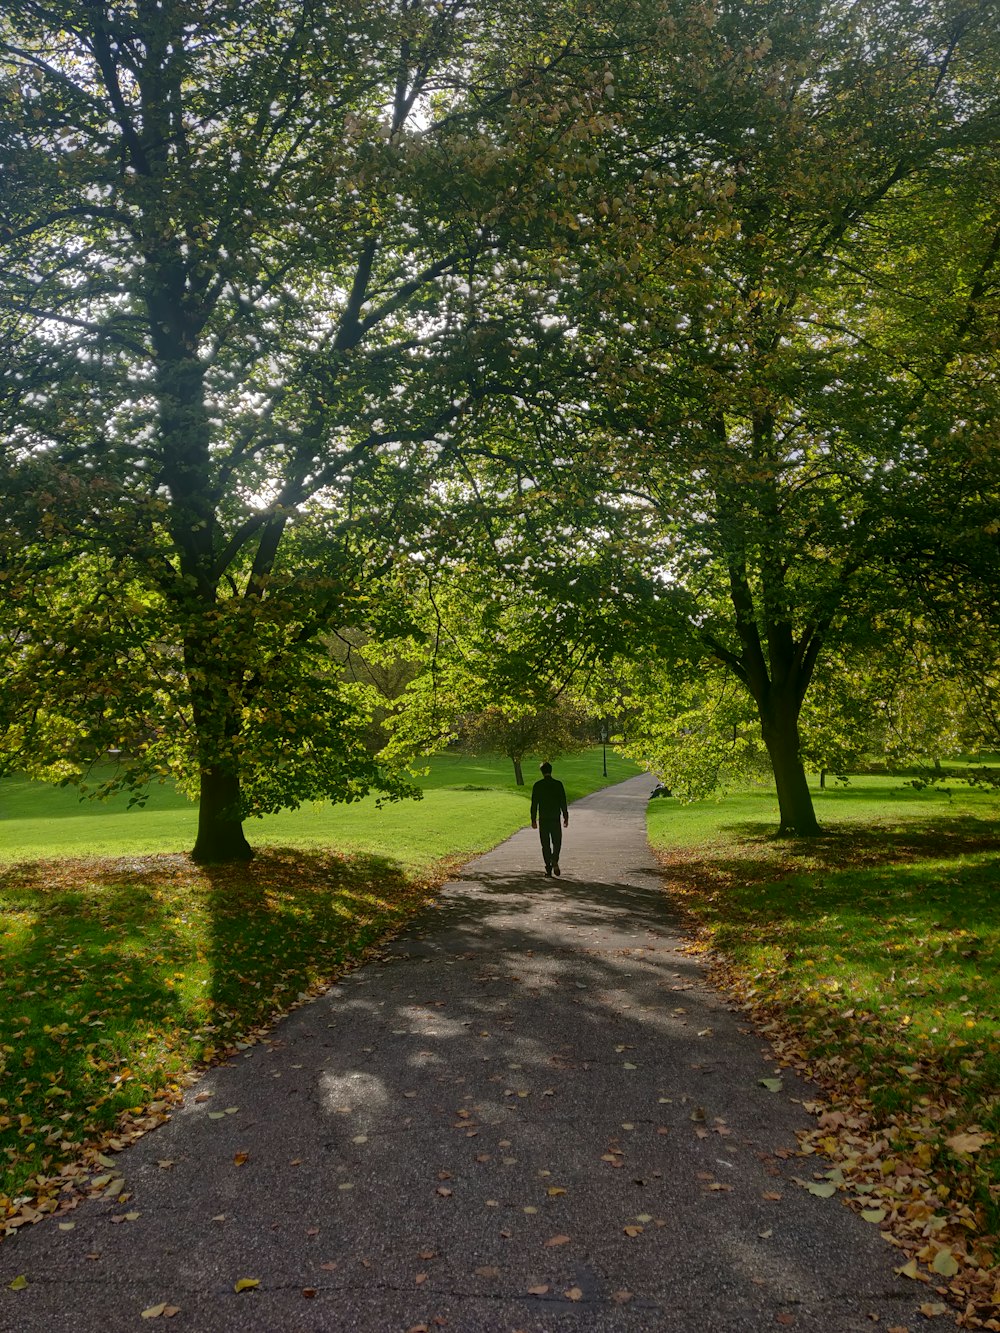 person walking on pathway between green grass and trees during daytime